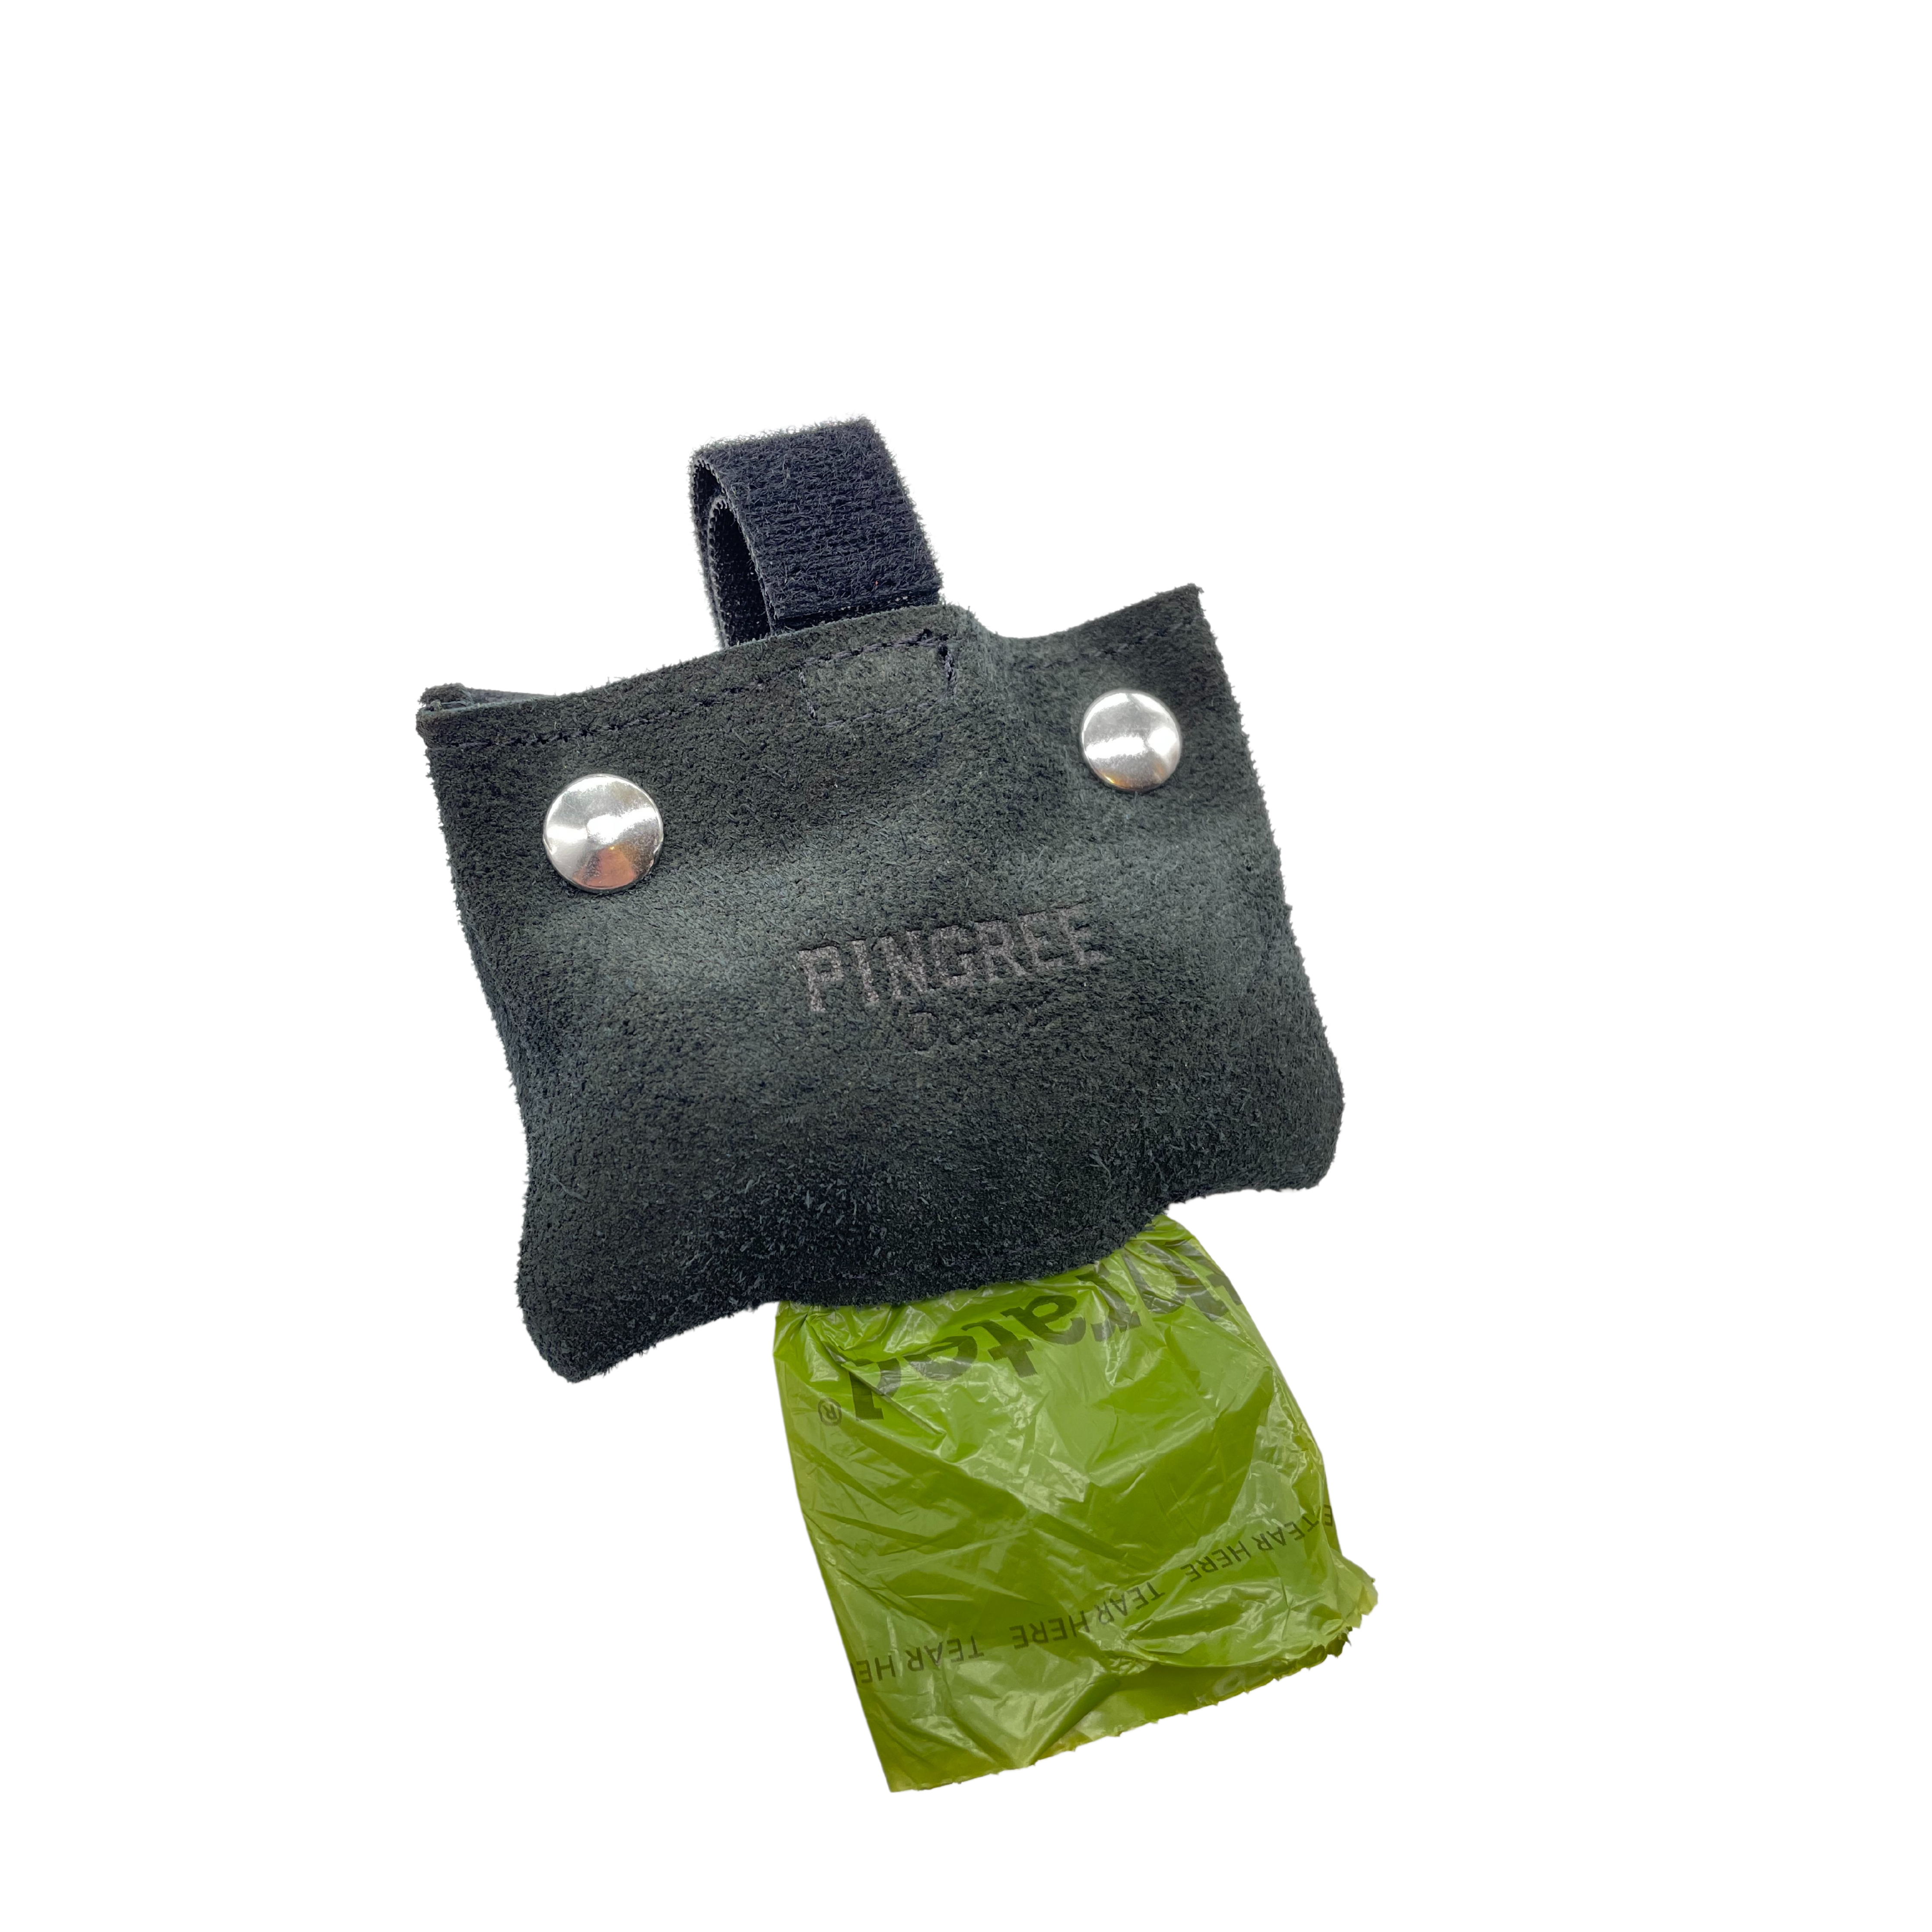 Pingree's Junkyard dog waste bag dispenser, made from upcycled automotive leather, comes with compostable poop bags